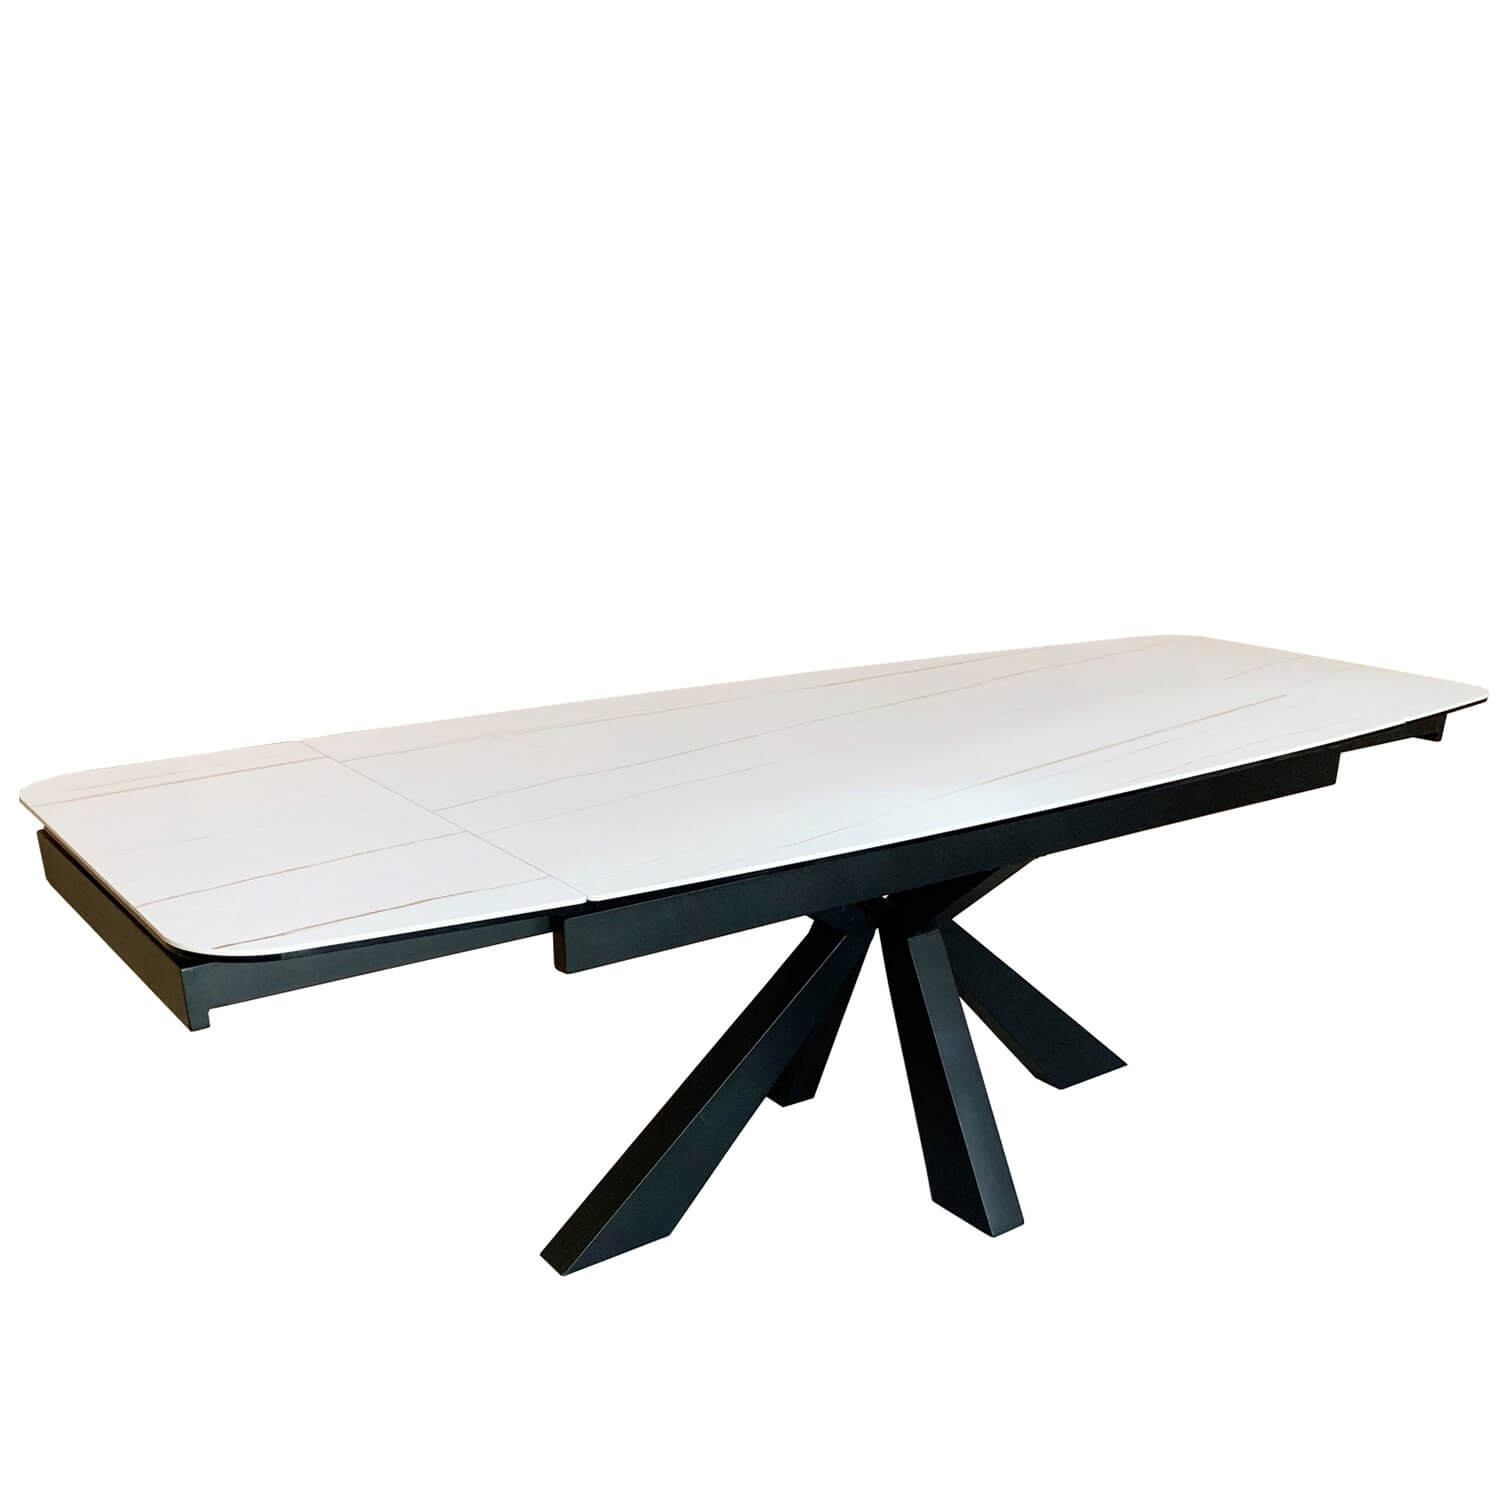 Moena extension dining table